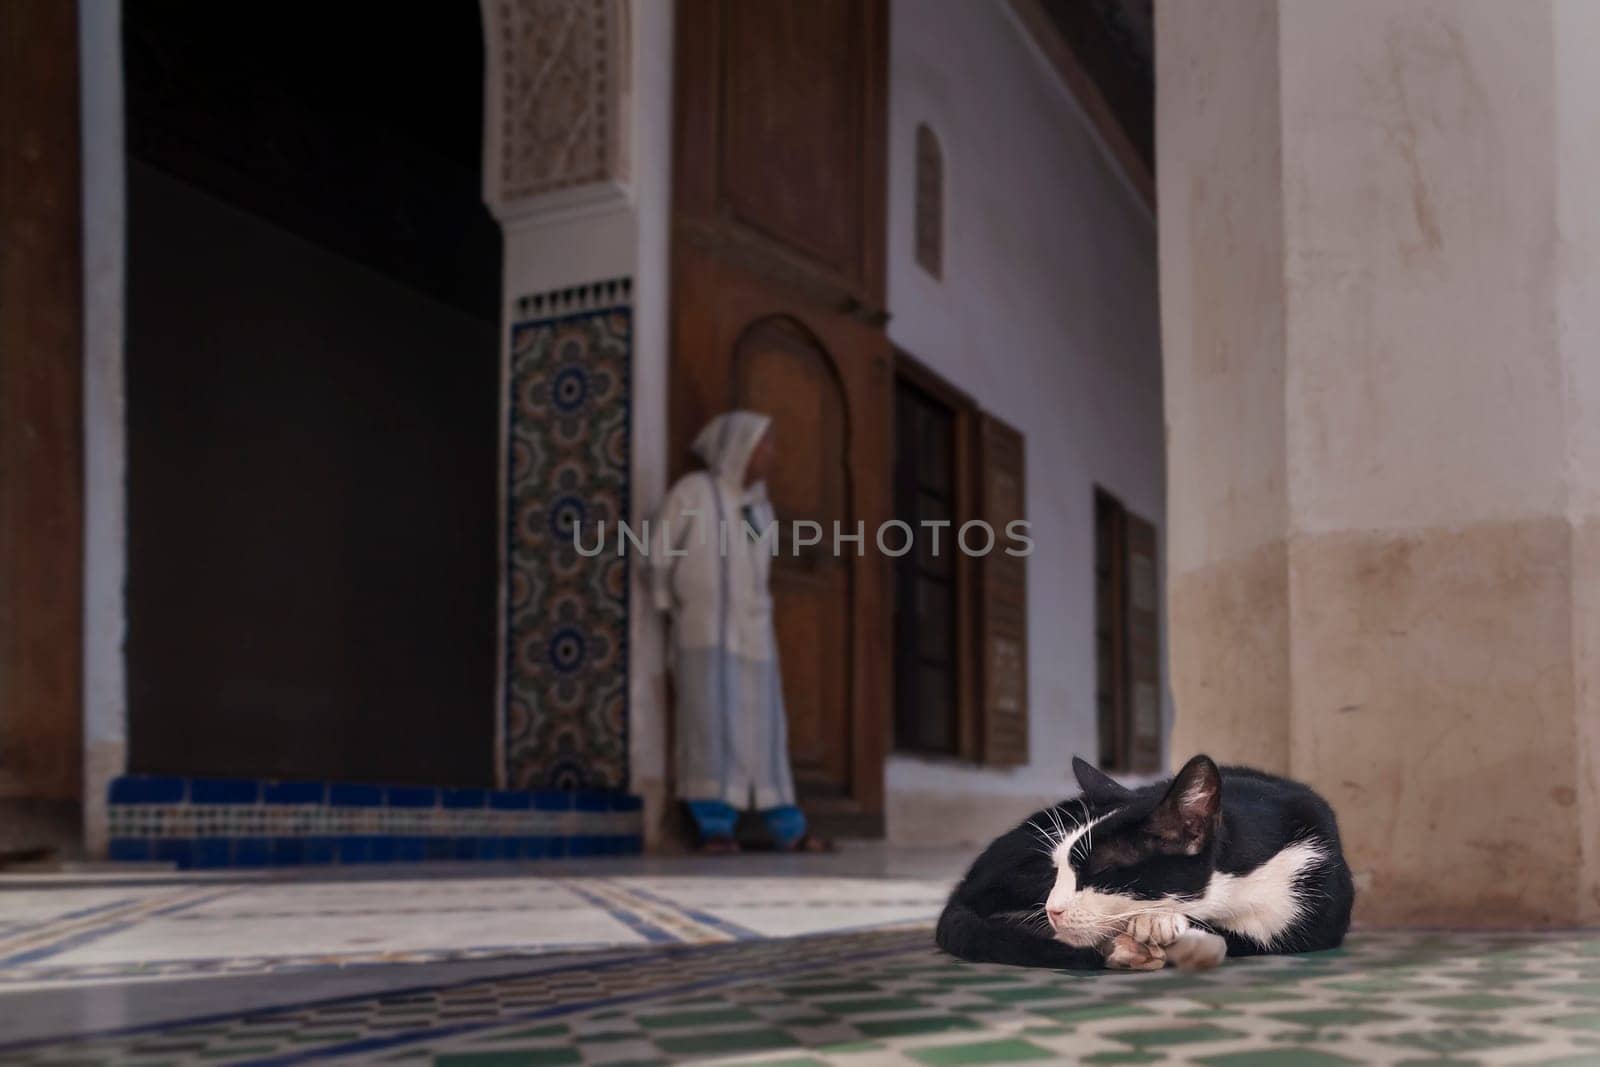 Bahia Palace in Marrakech by Giamplume